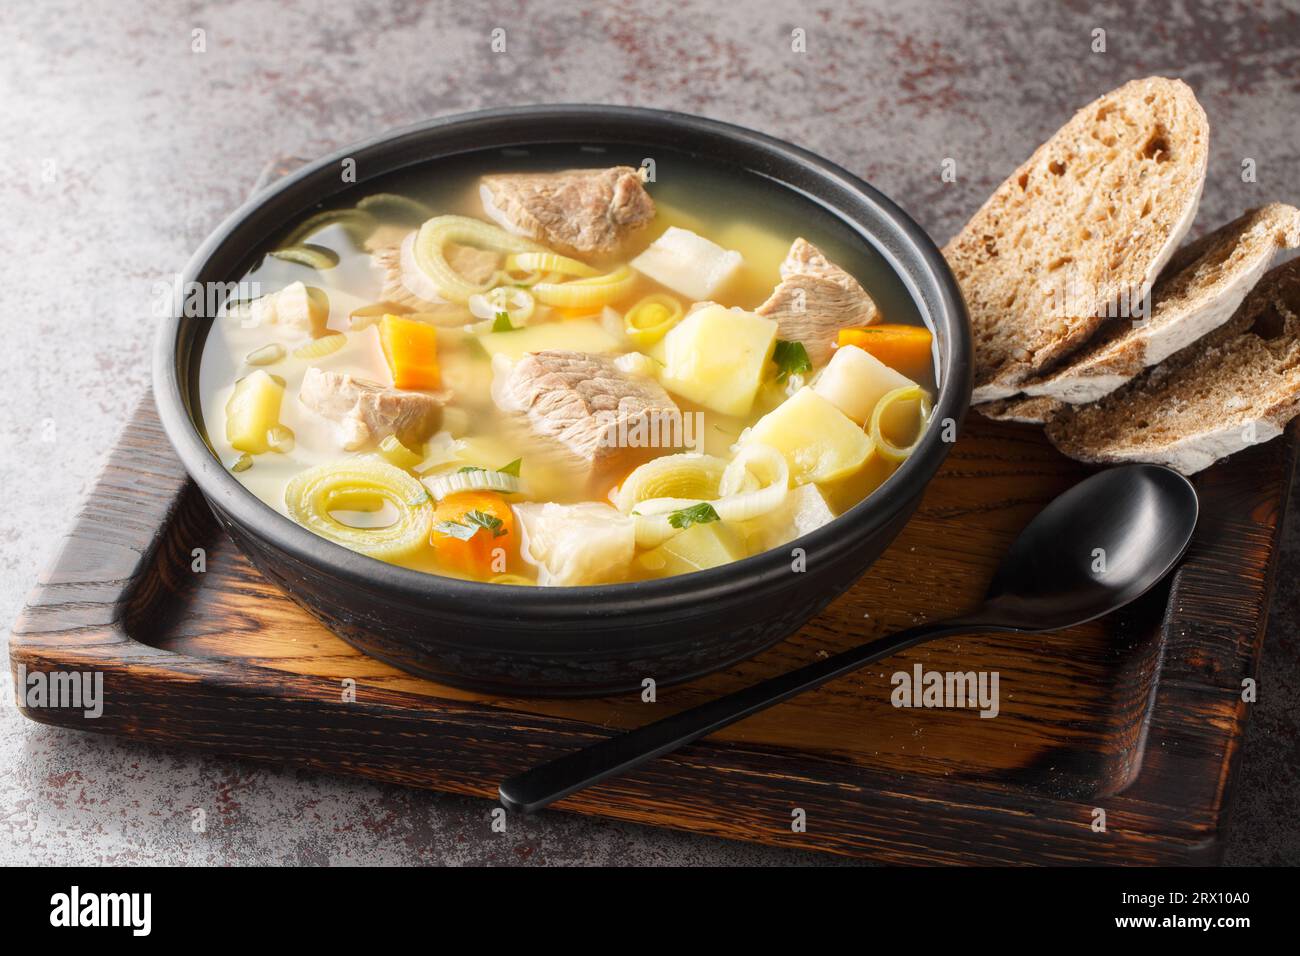 Kottsoppa soup is a meat and root vegetables include carrot, potato, celeriac, parsnip, turnip and Rutabaga close-up on a plate on the table. Horizont Stock Photo